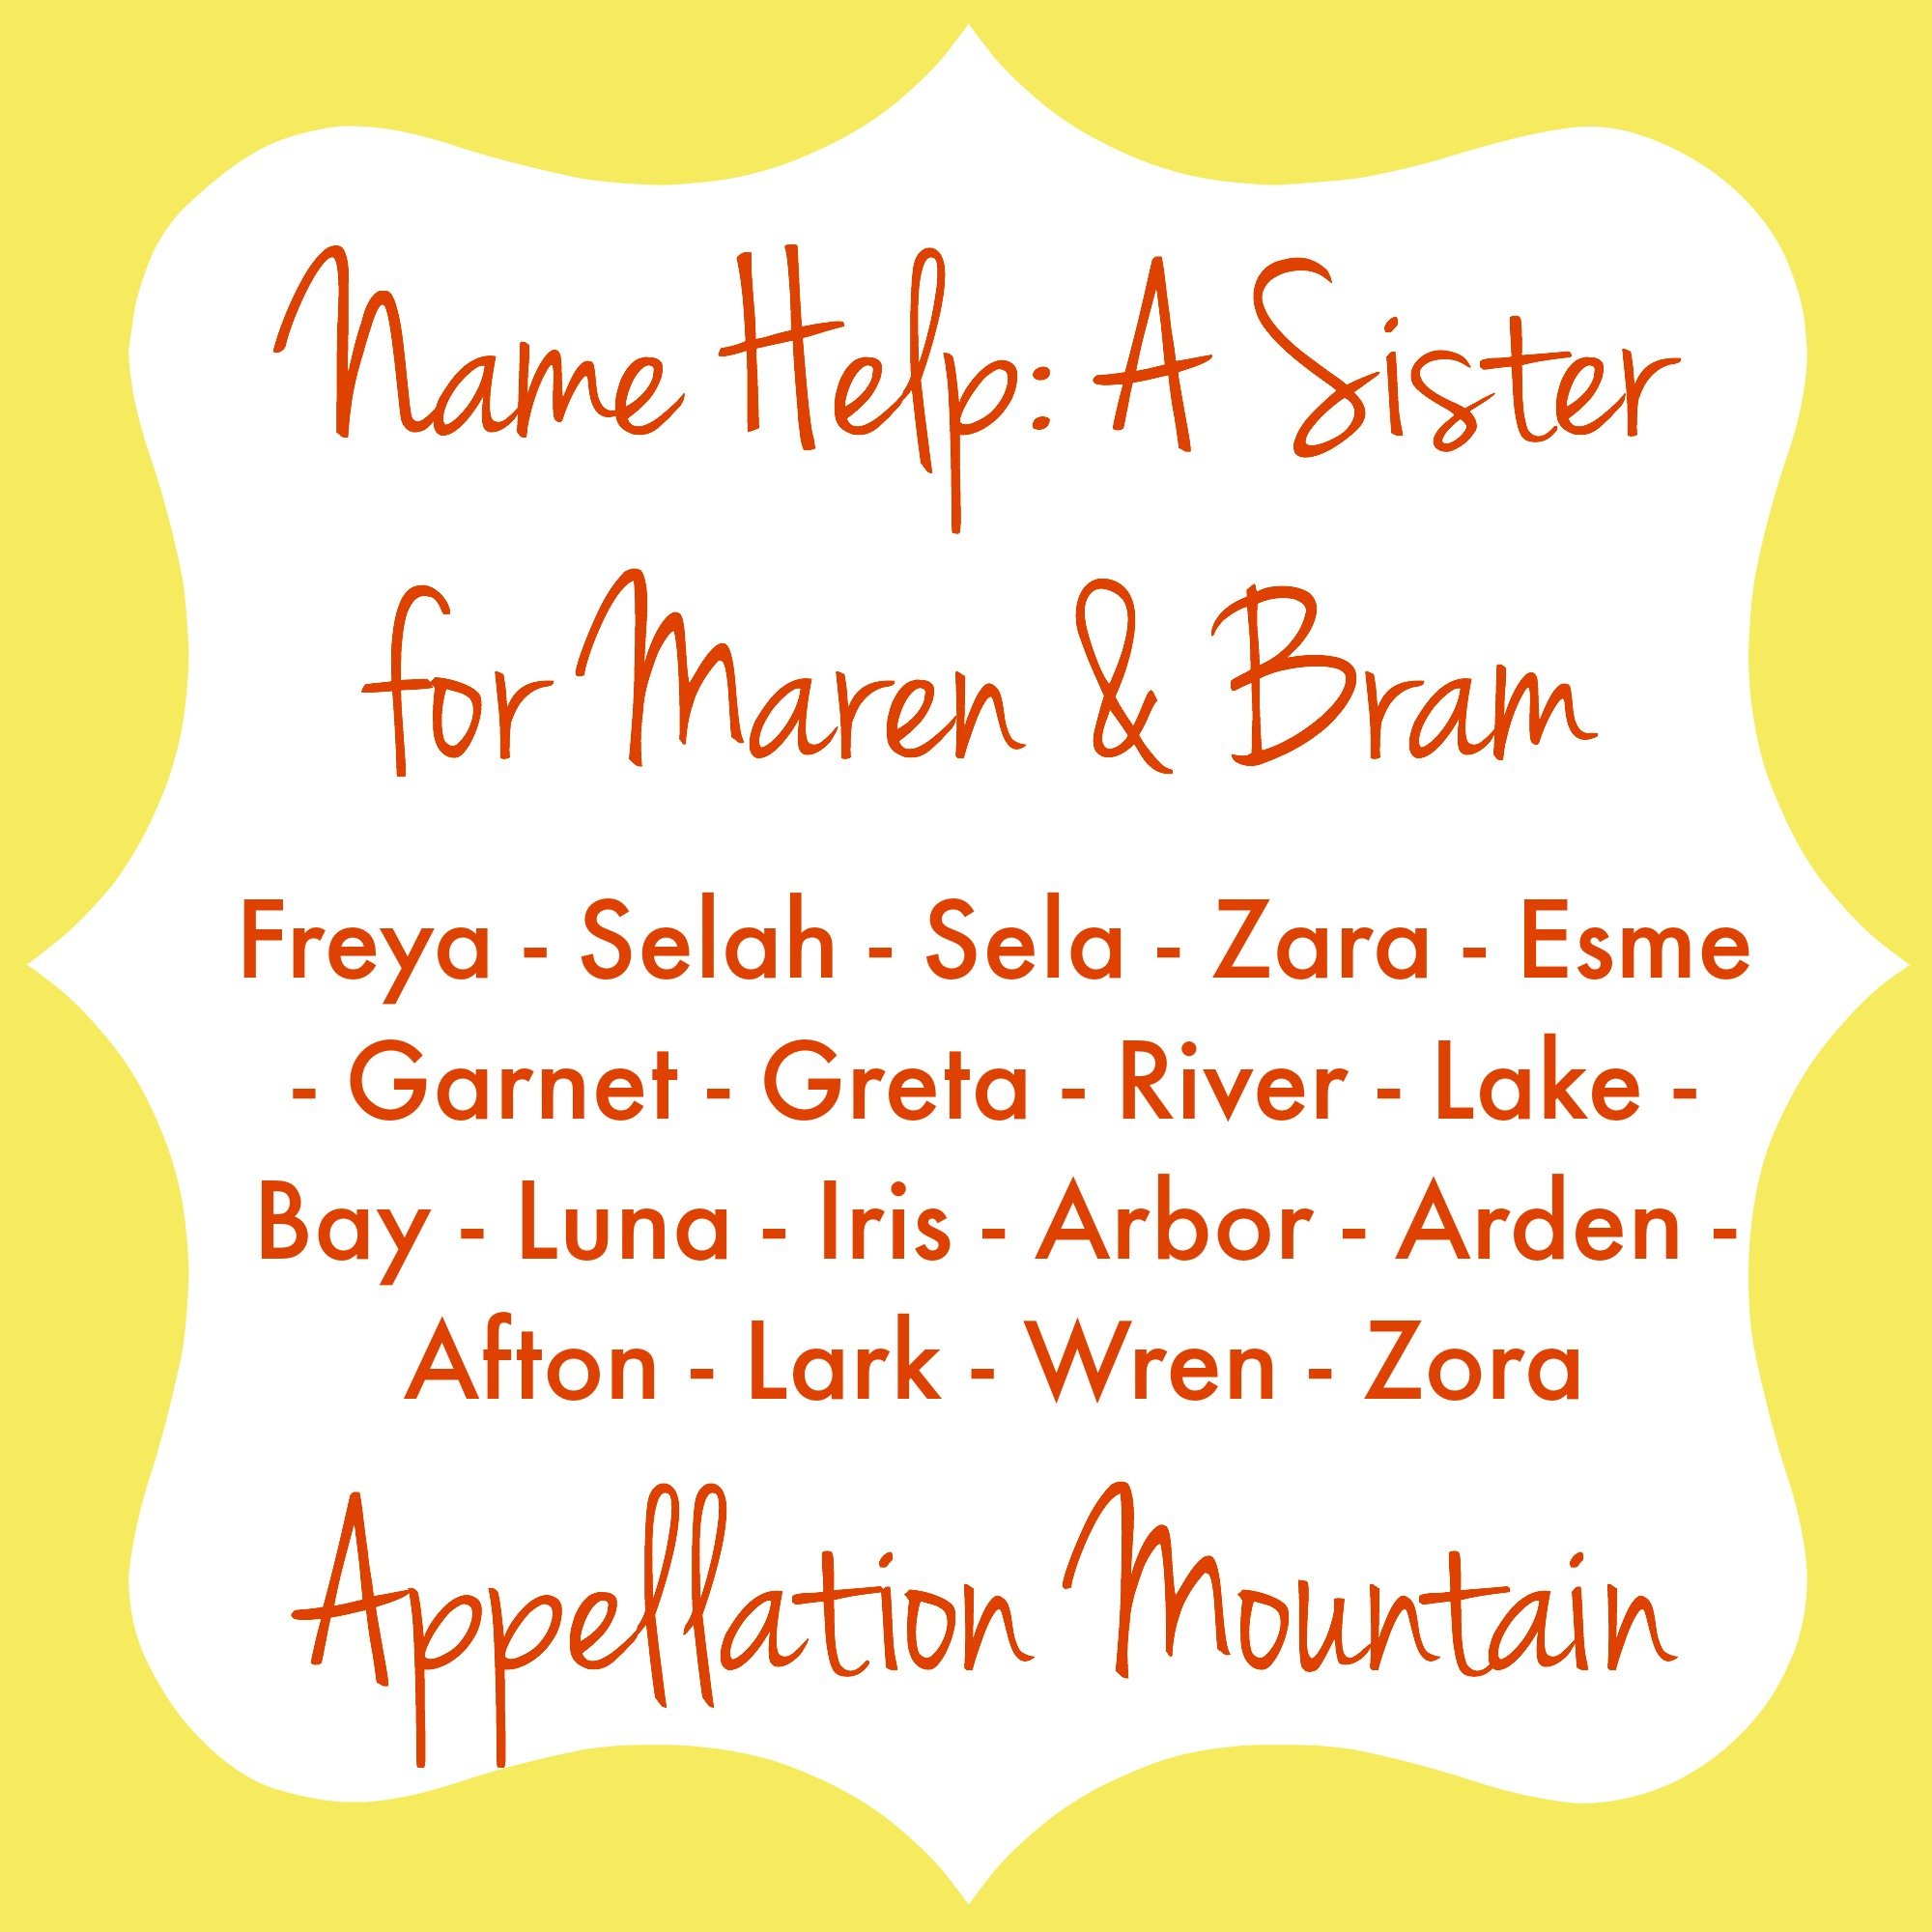 Name Help: A Sister for Bram and Maren - Appellation Mountain